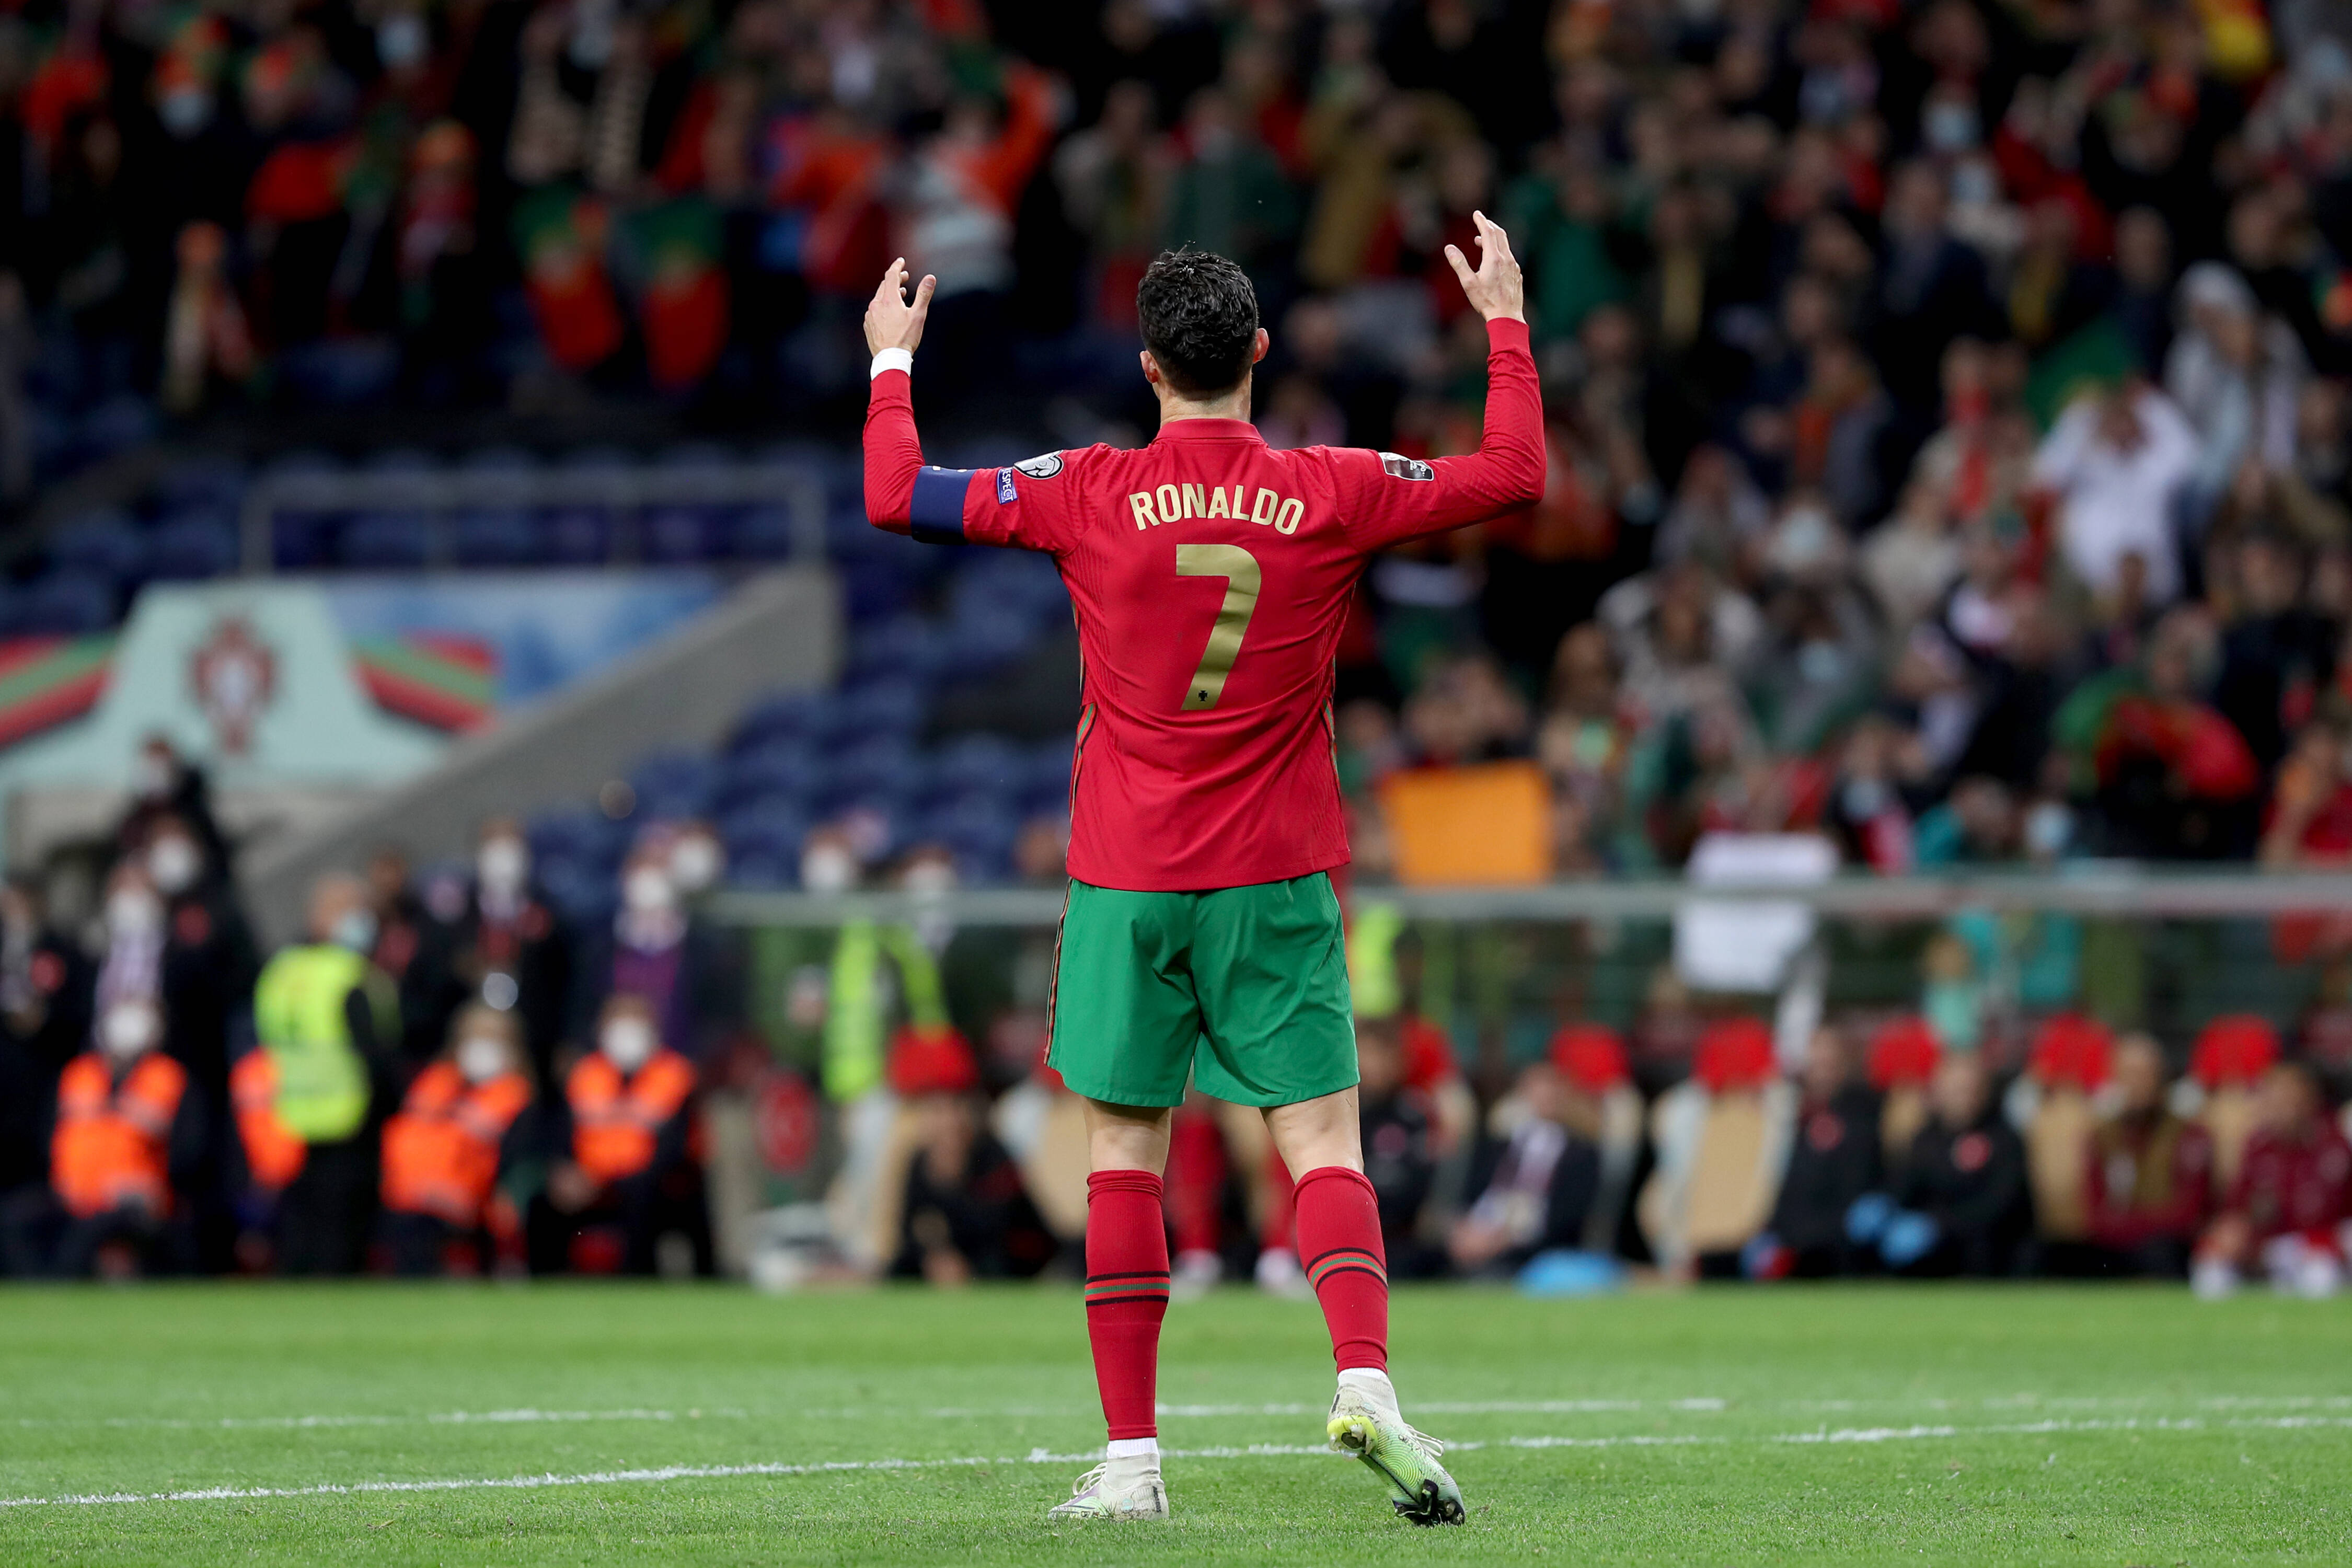 Could Cristiano Ronaldo being "the boss" hold Portugal back? - Futbol on FanNation